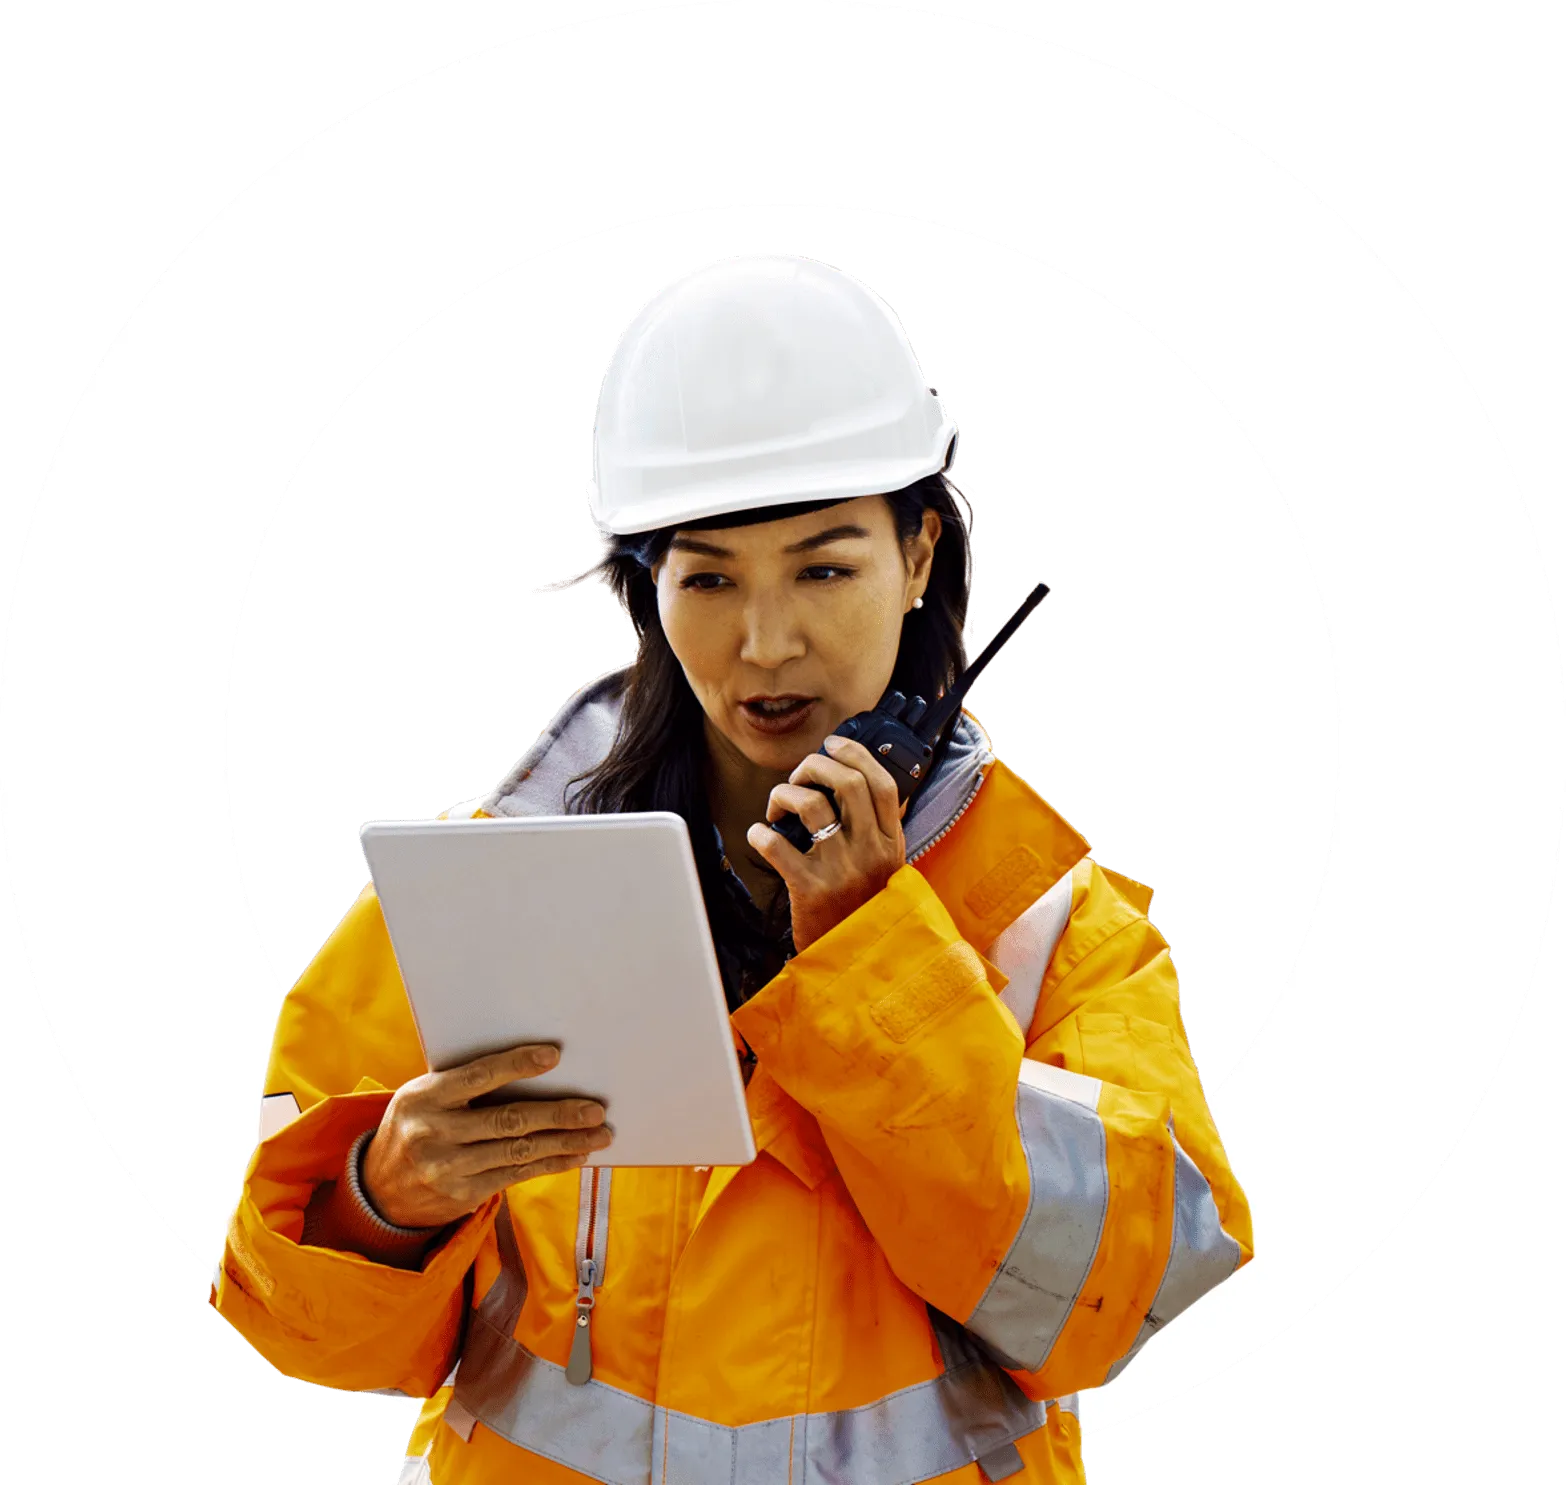 O amplifier woman in hi-vis and hard hat reading documents and using walkie talkie